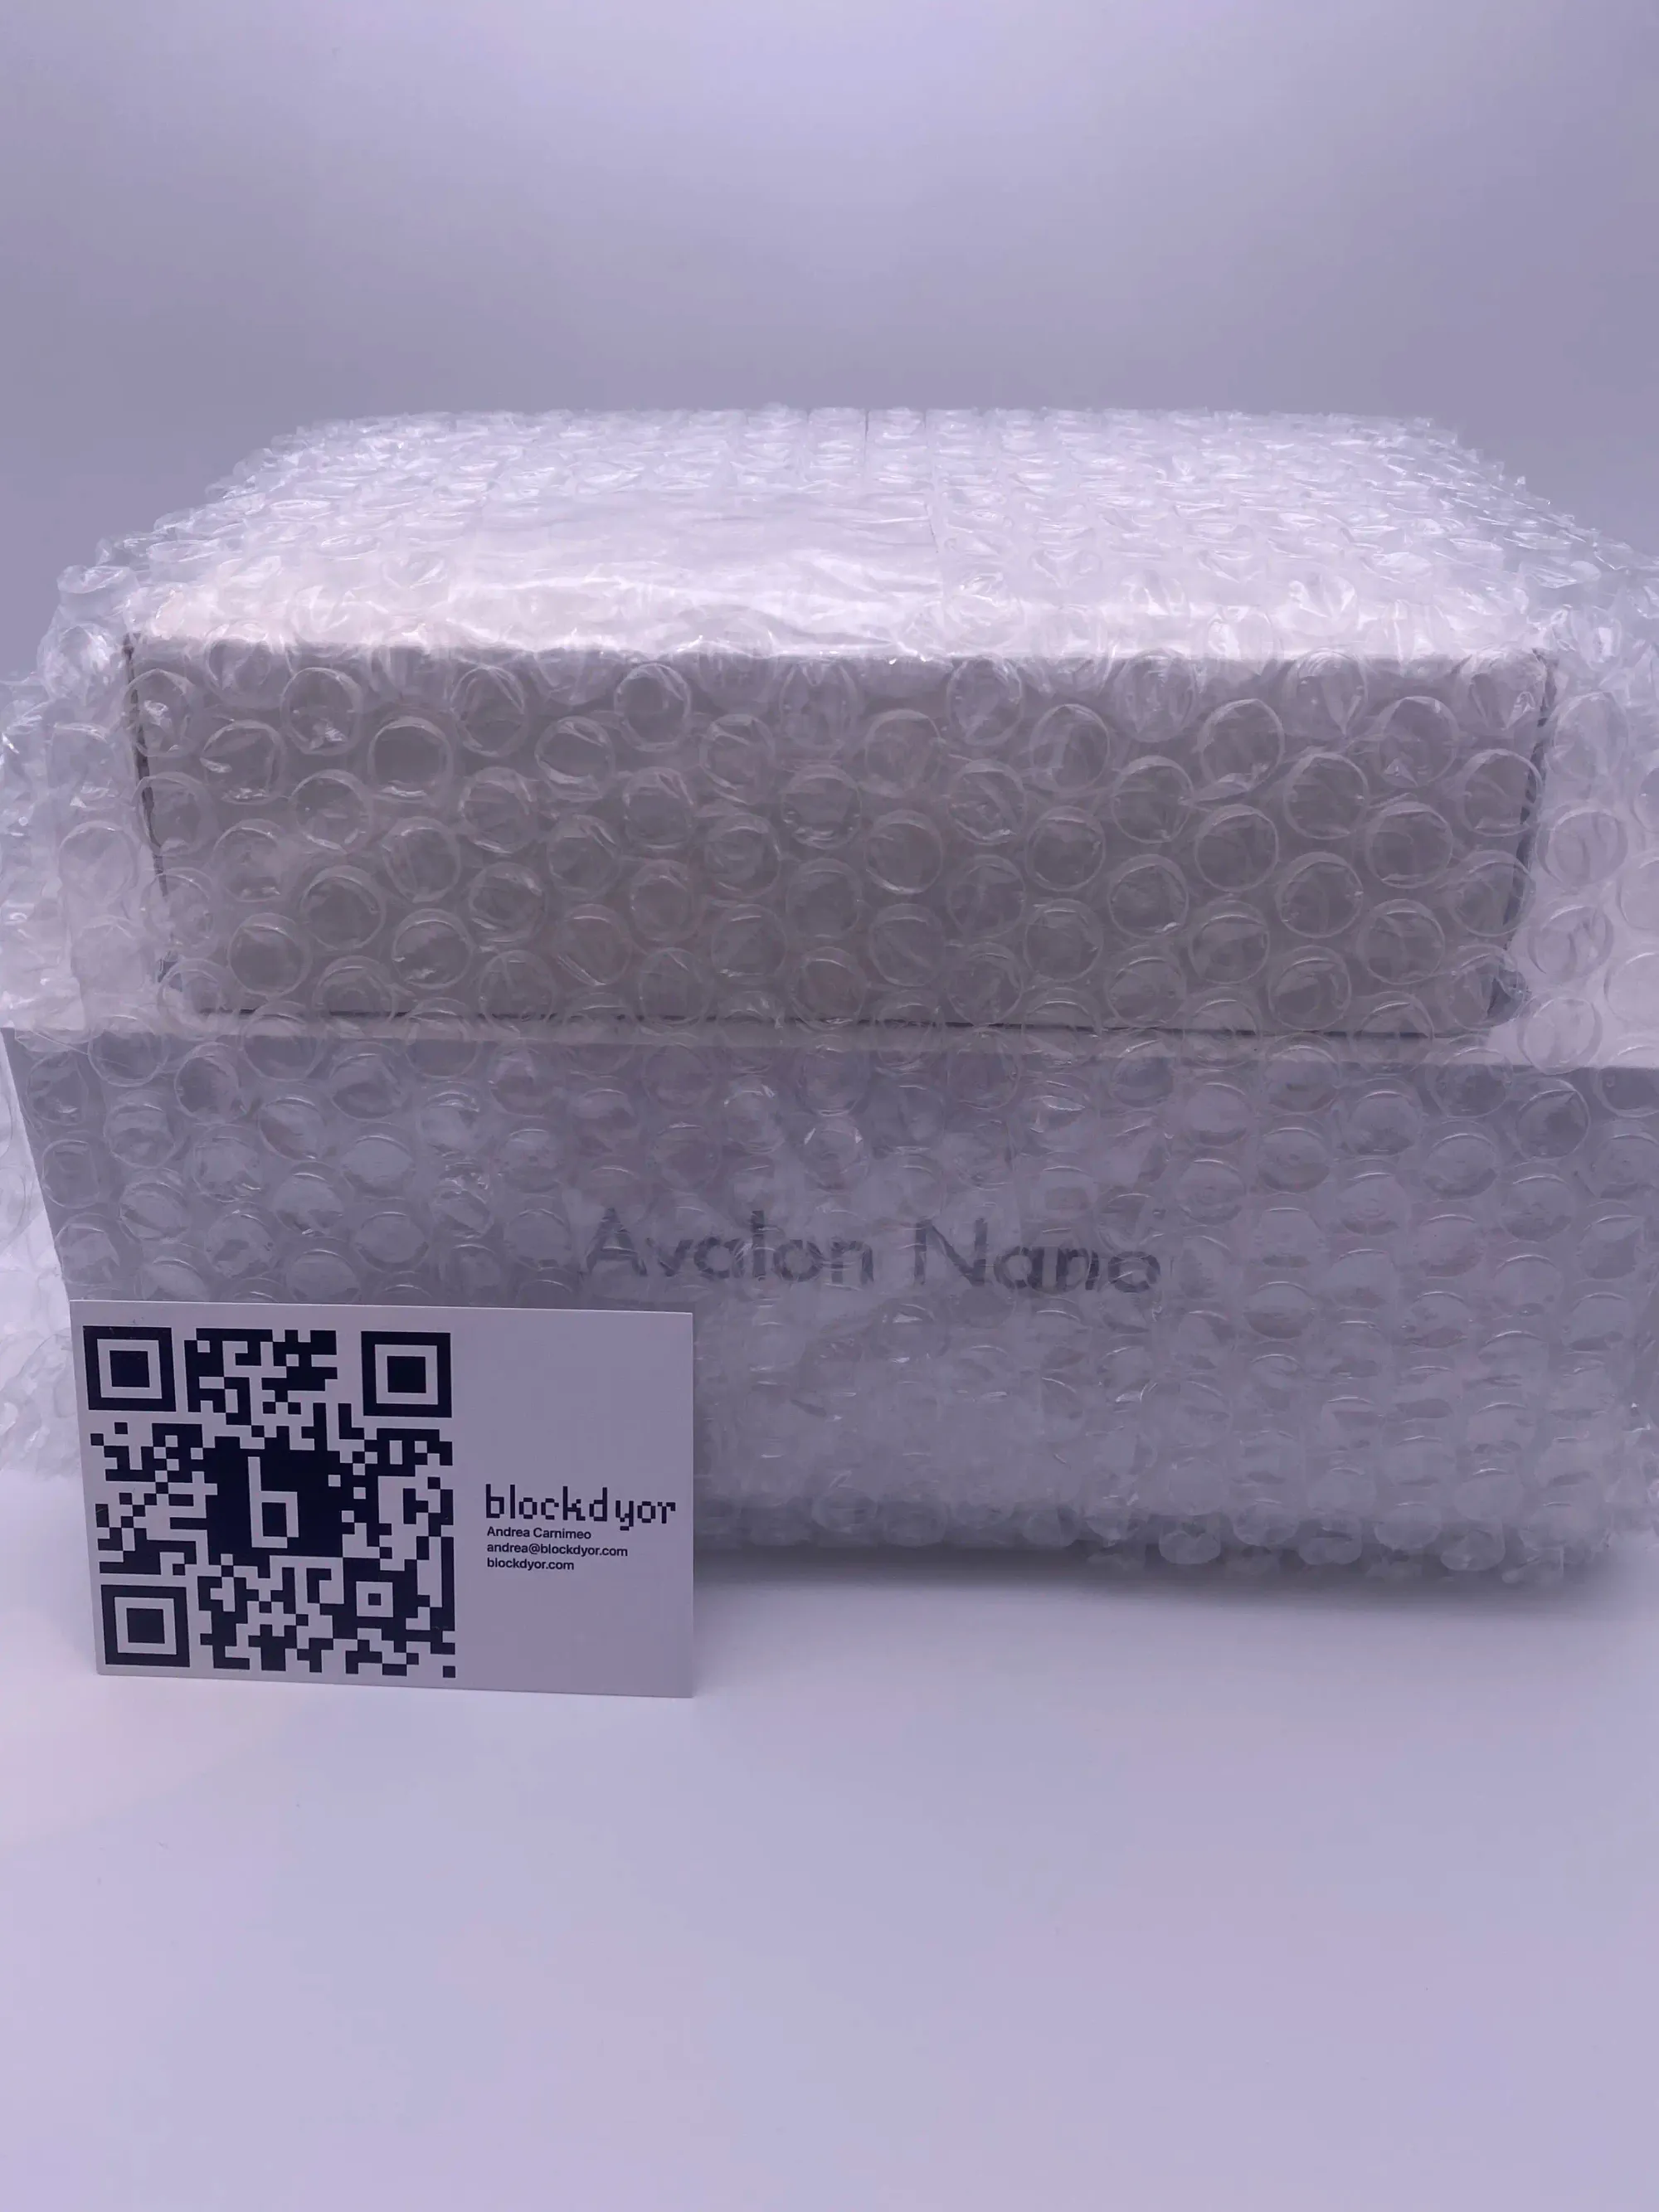 Canaan Avalon Nano 3 Unboxing Step 1